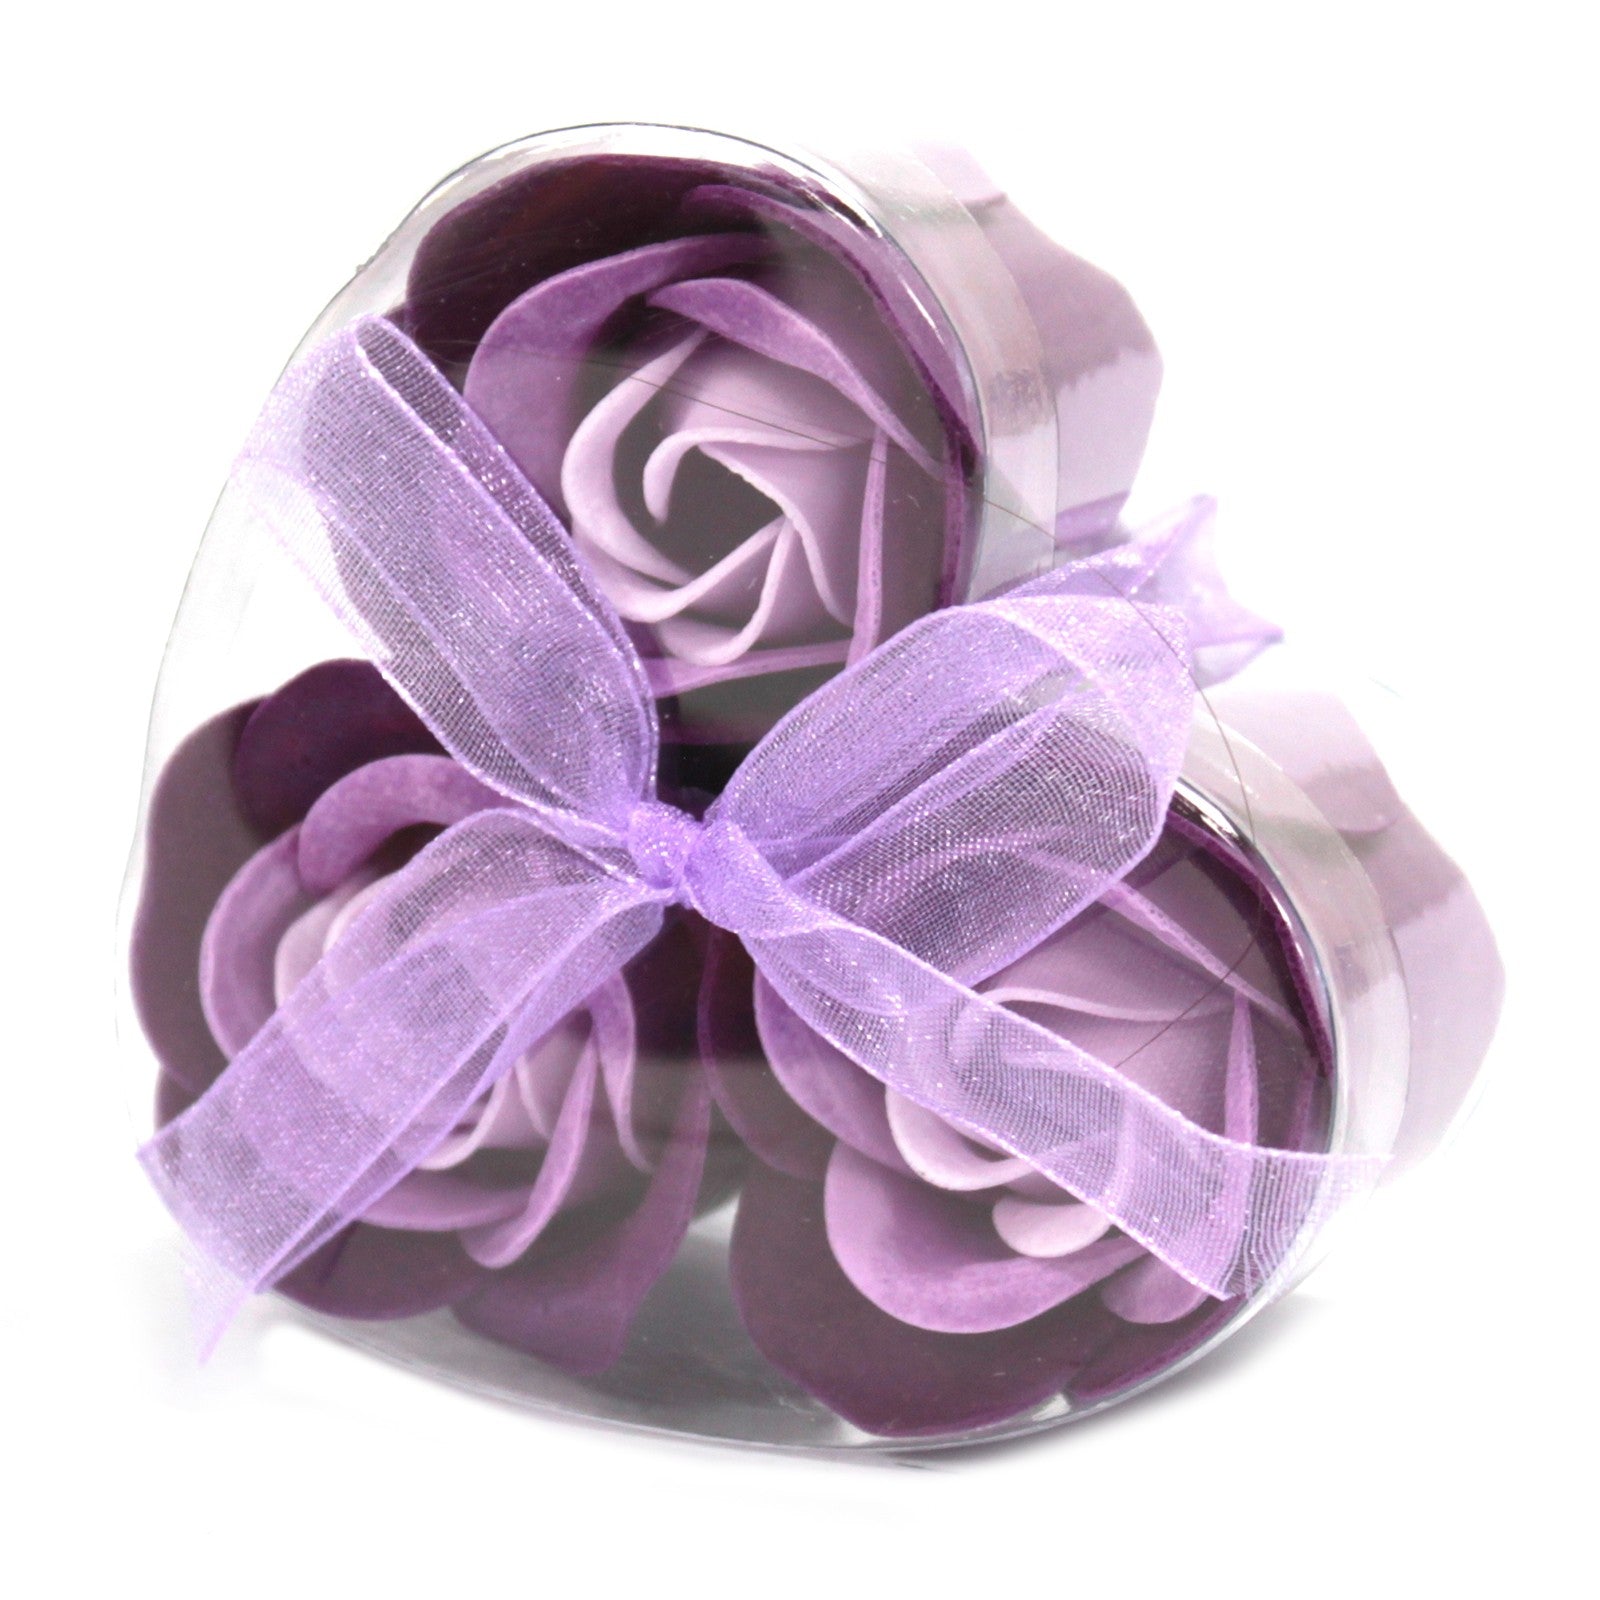 View Set of 3 Soap Flower Heart Box Lavender Roses information